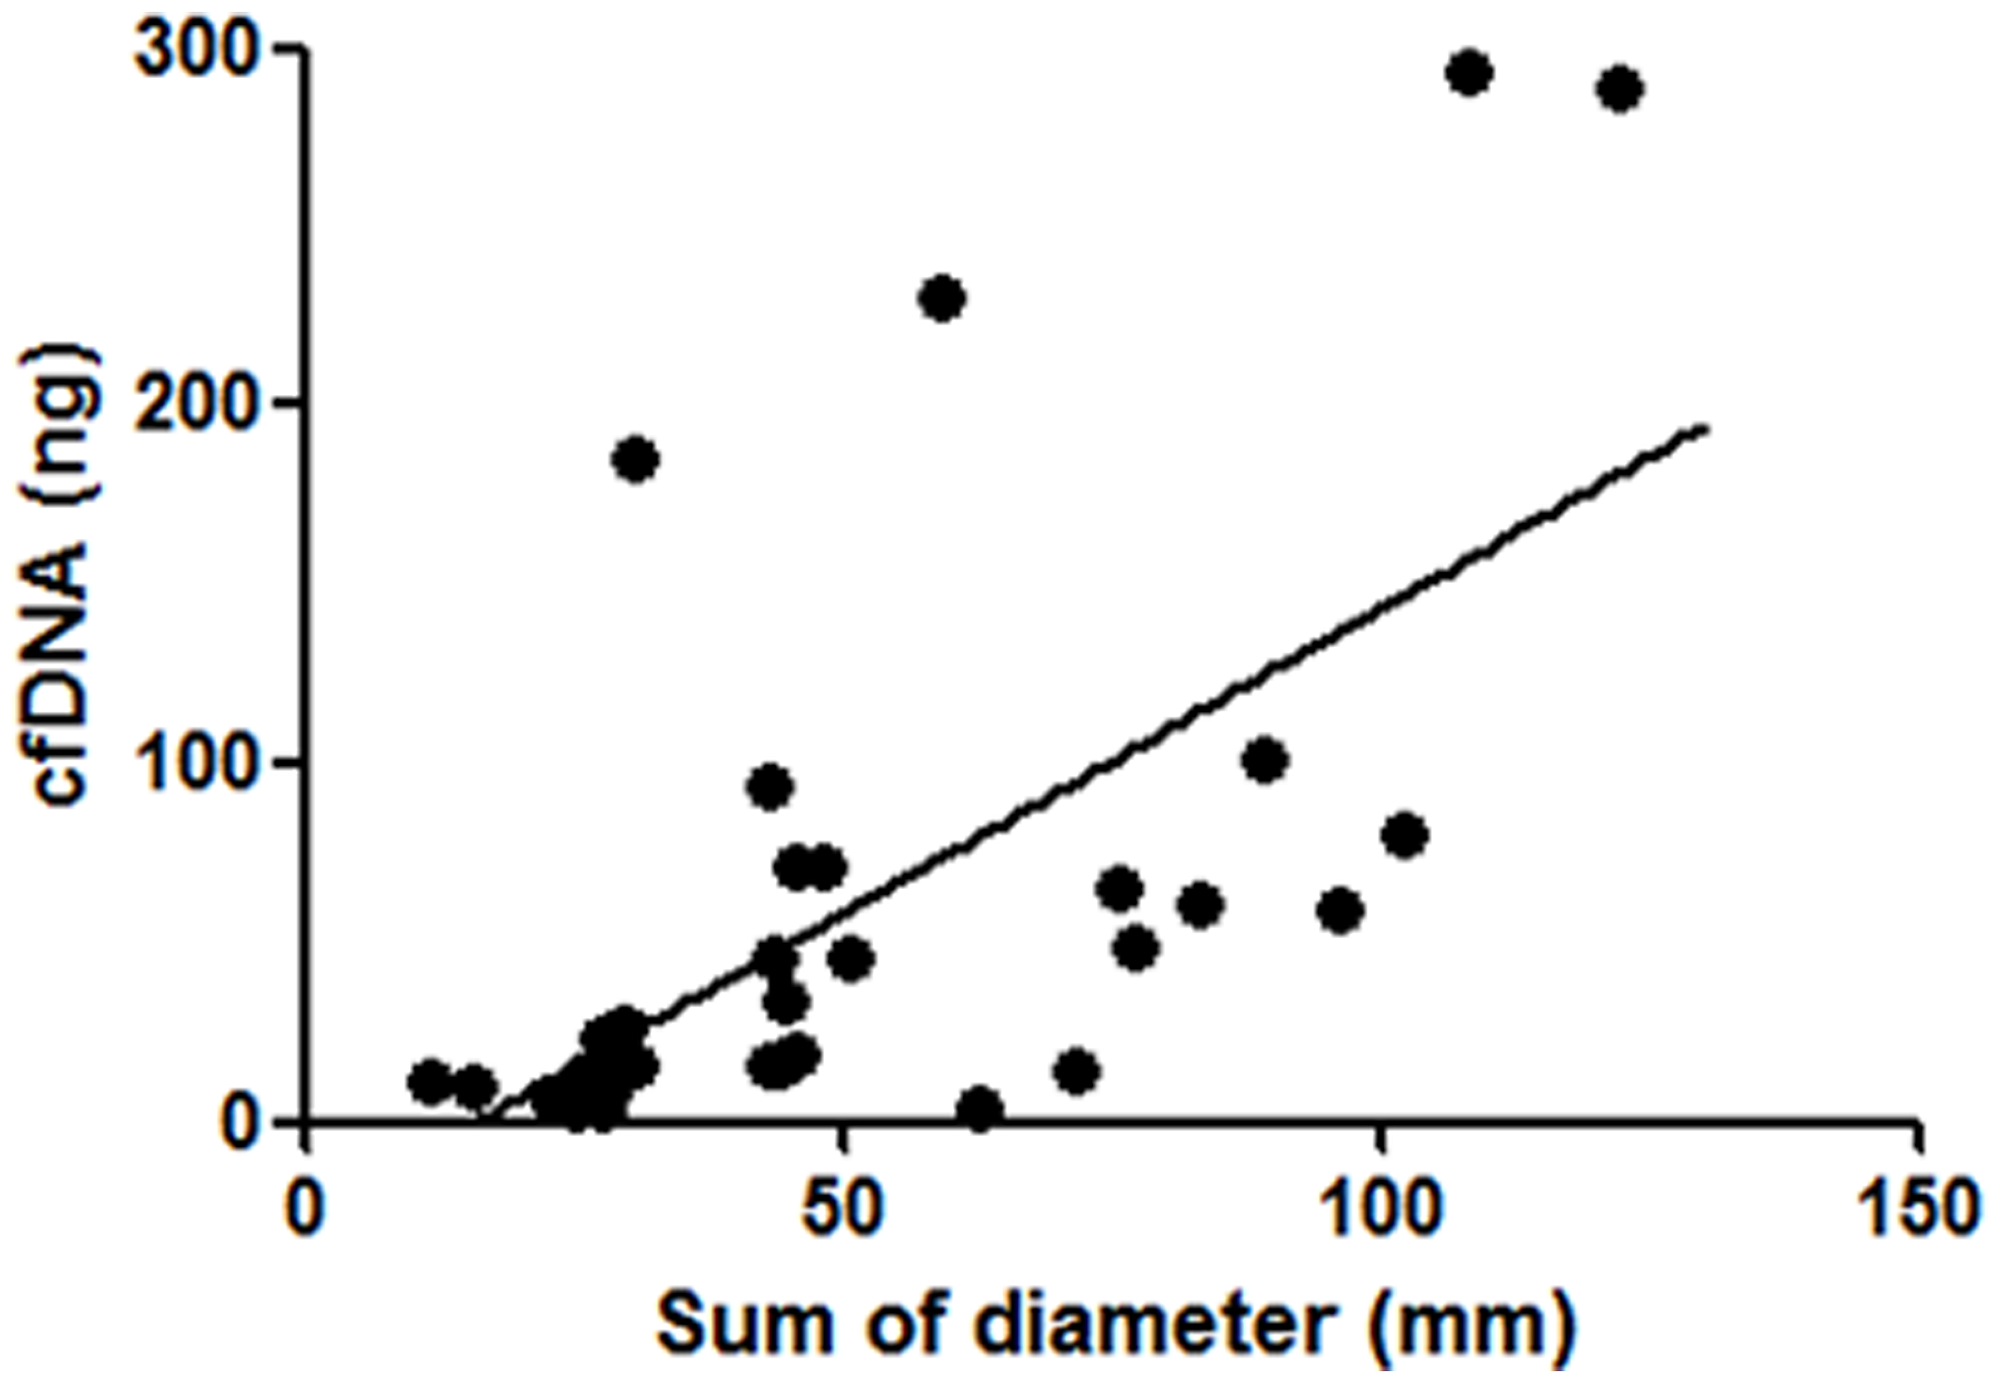 Correlation between isolated cfDNA amounts and the sum of diameters of target lesions.